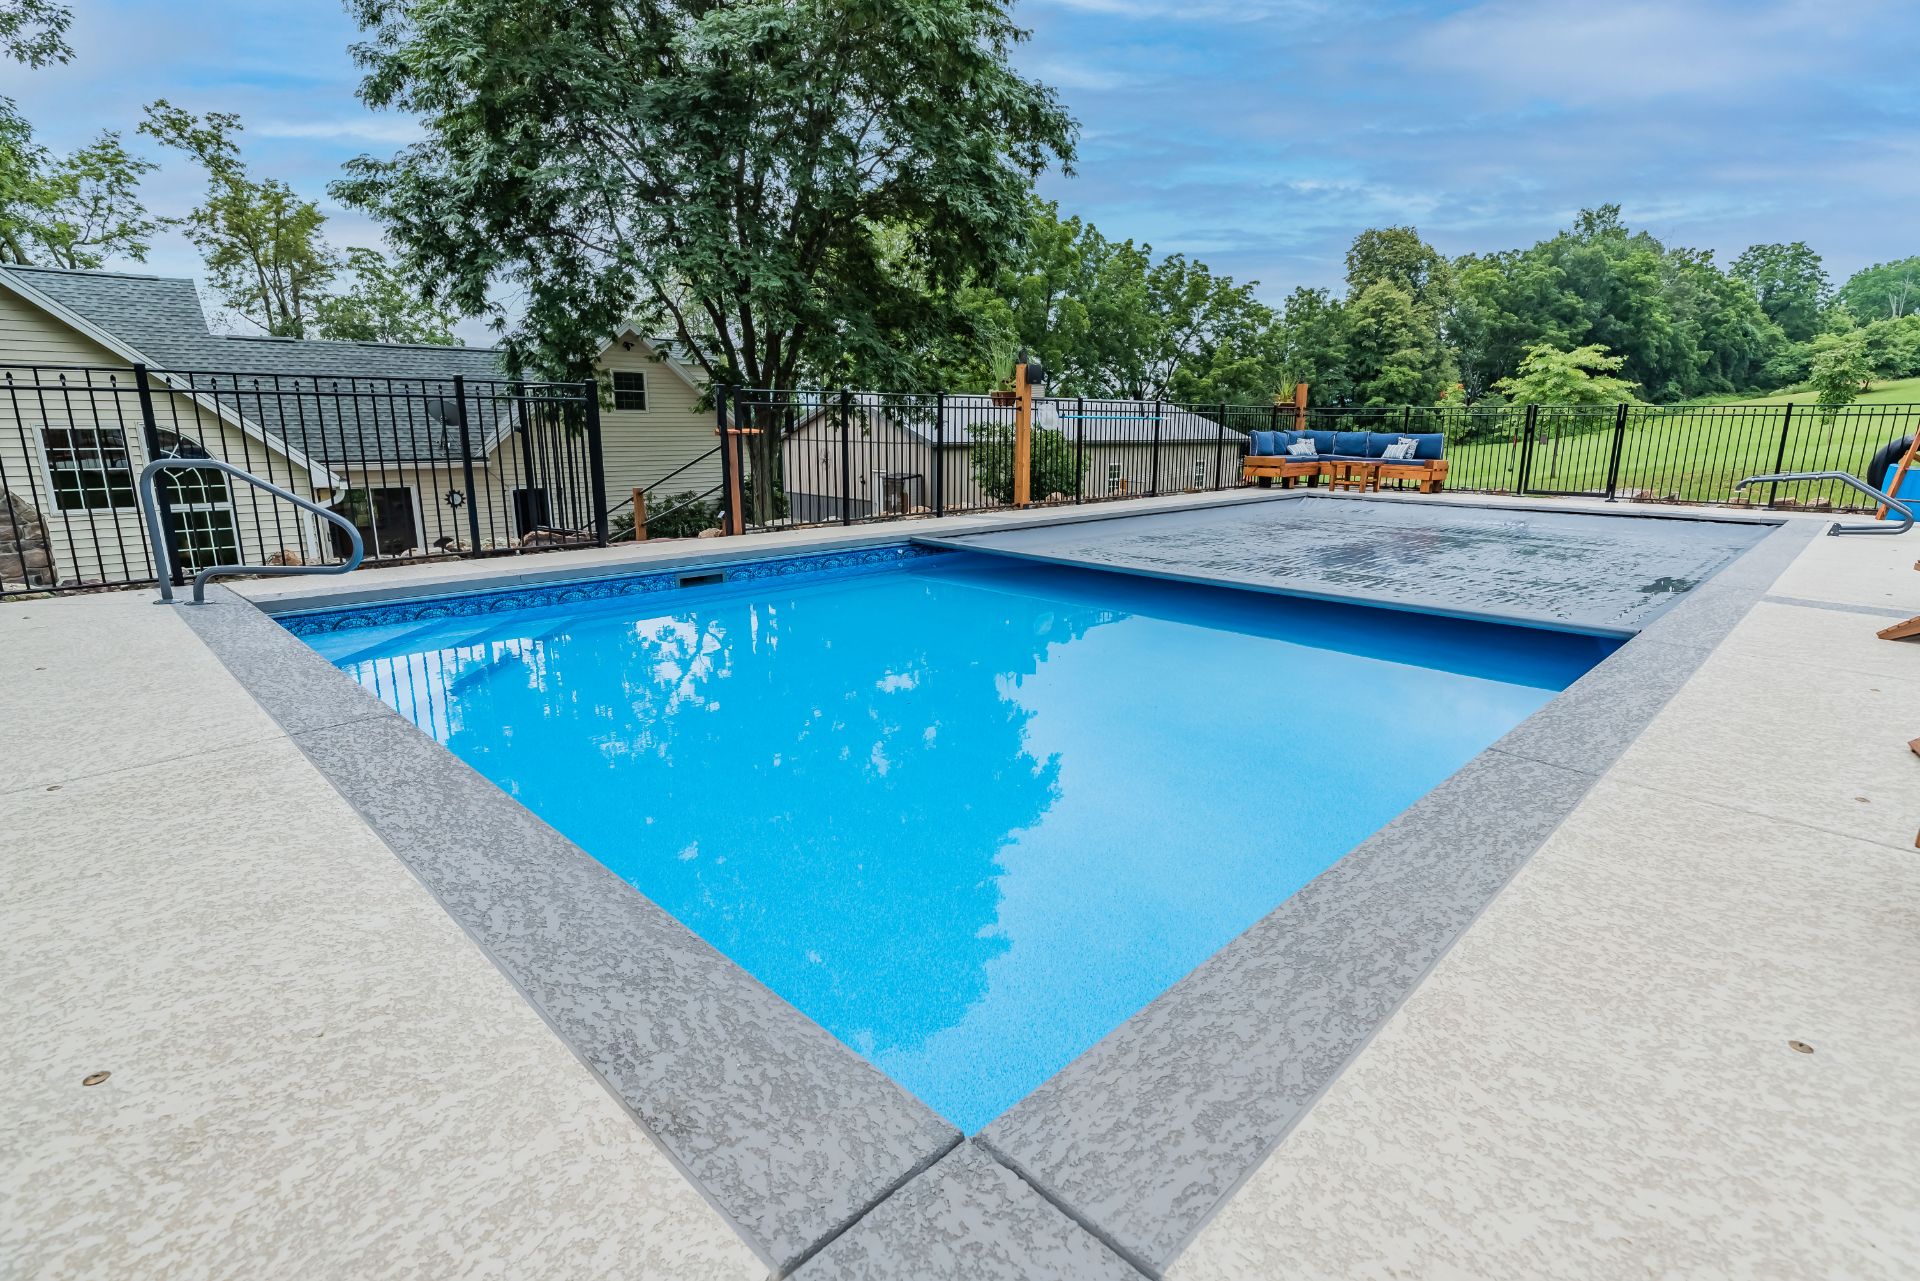 Professional Pool Opening vs. DIY: What’s Best for You?